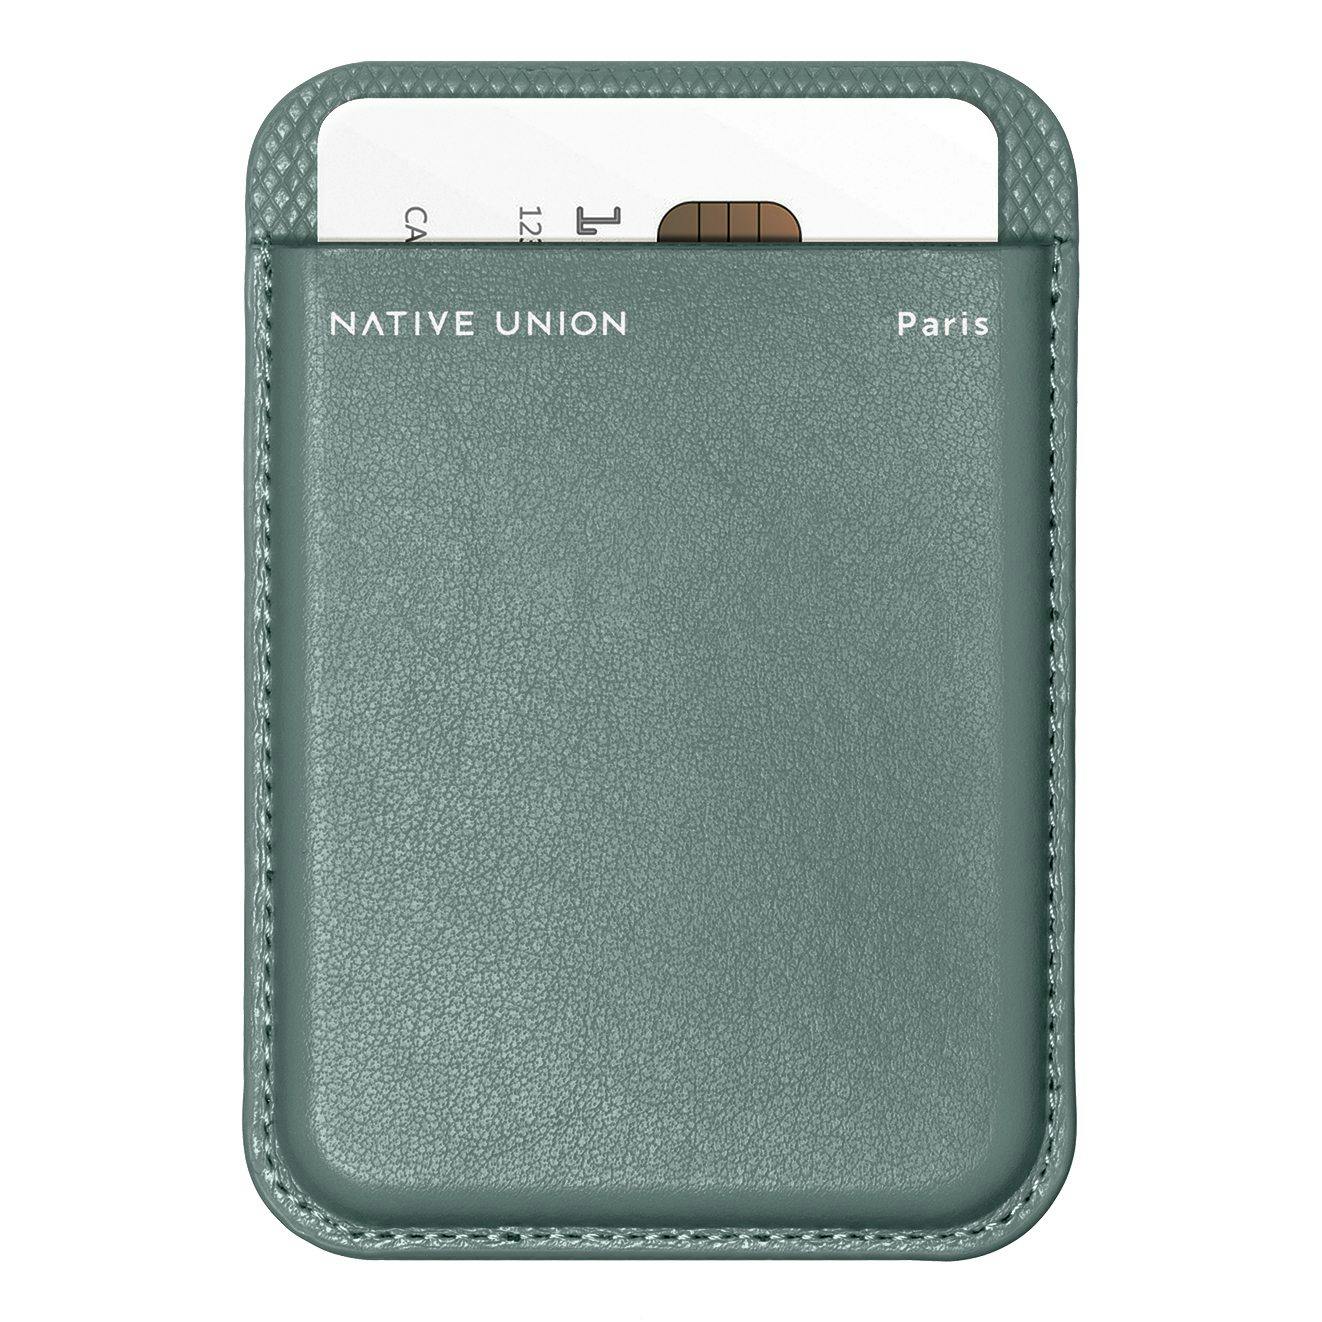 Re)Classic Card Holder